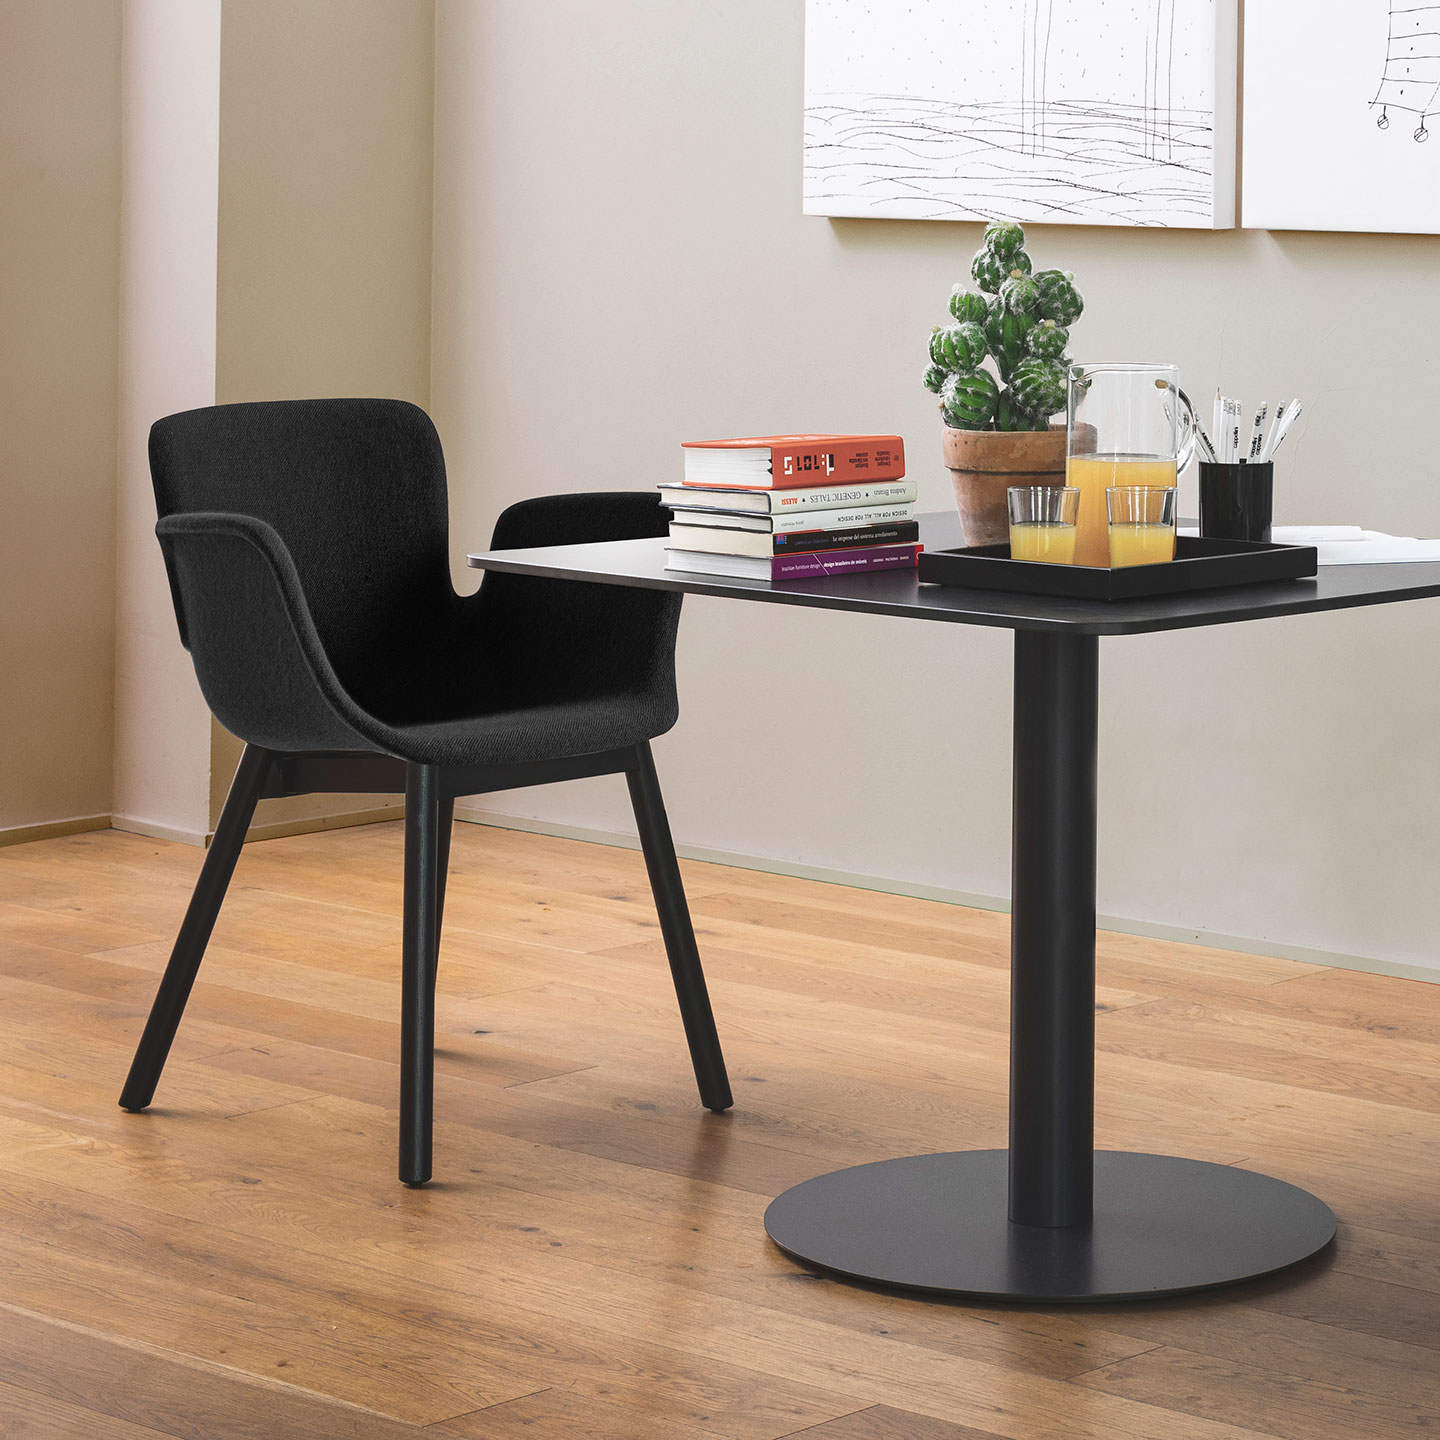 Haworth Juli Soft chair in black color in a casual office space